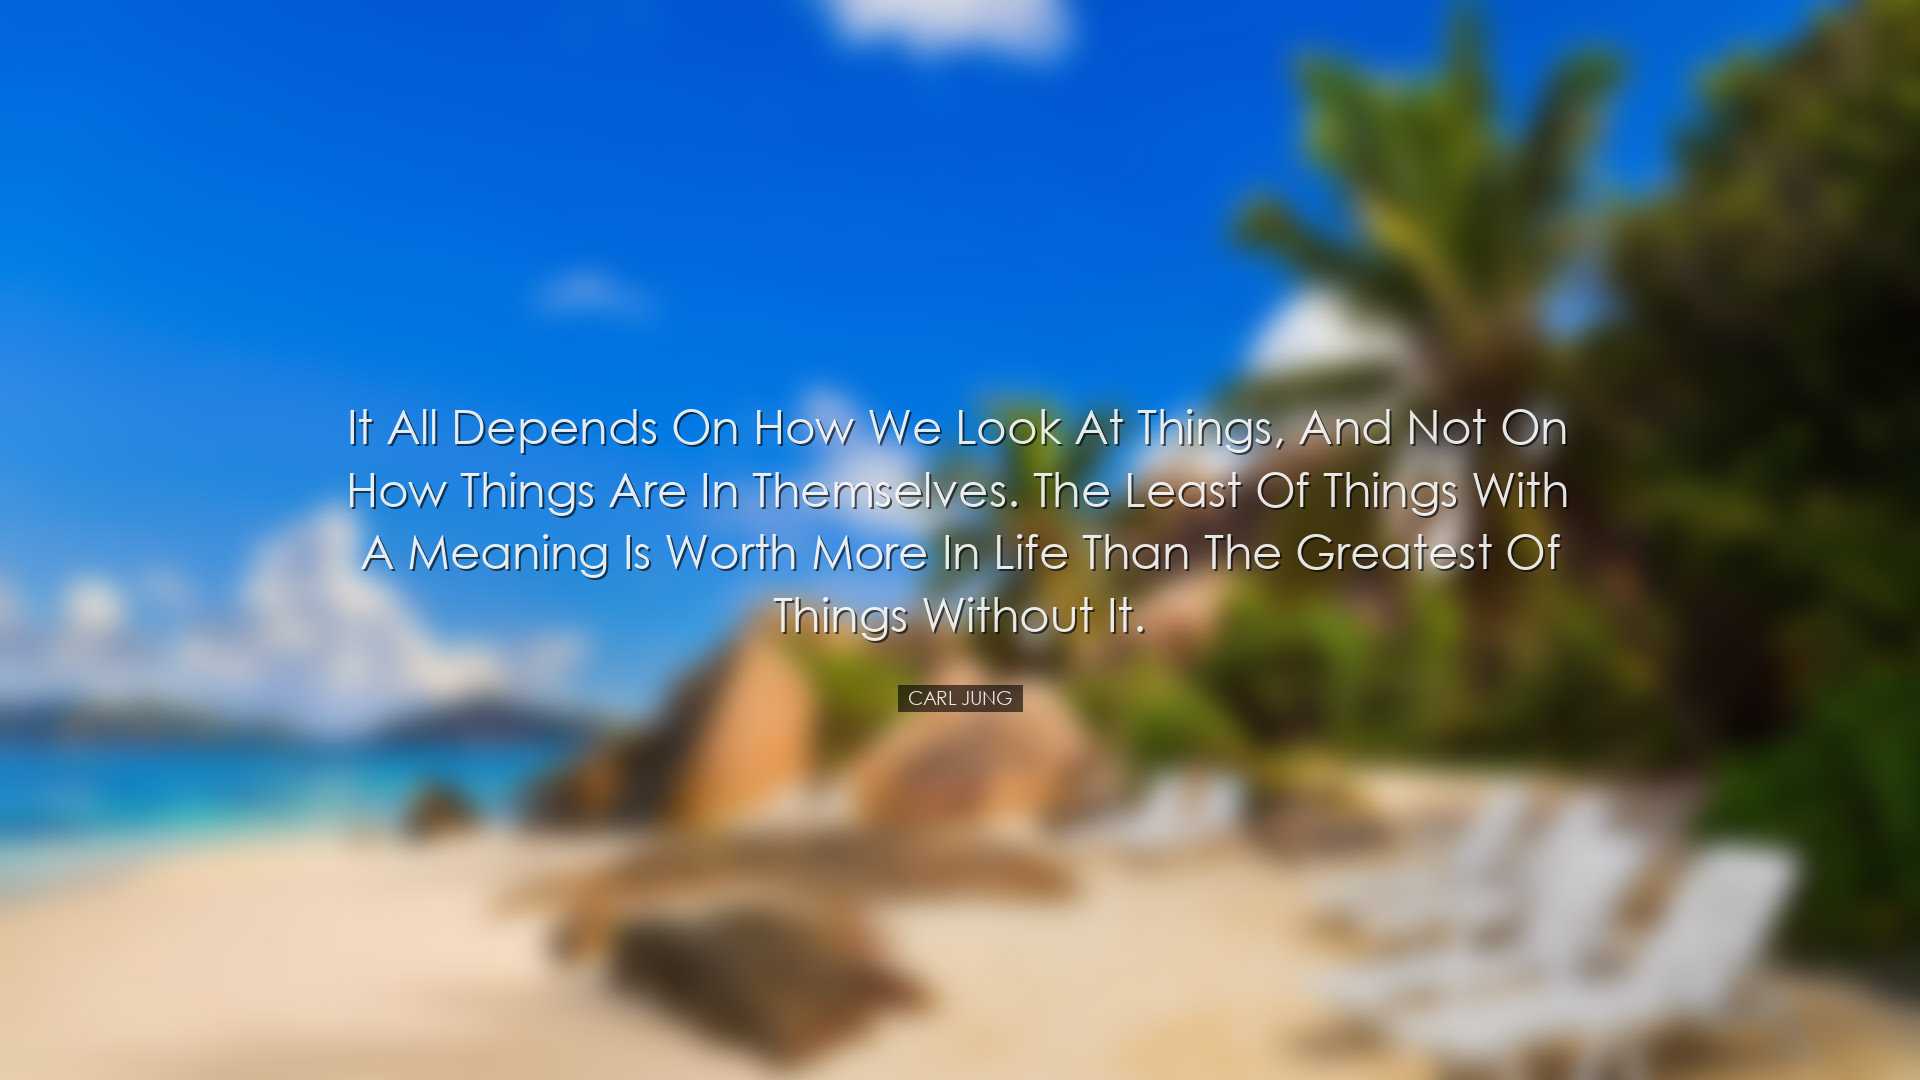 It all depends on how we look at things, and not on how things are